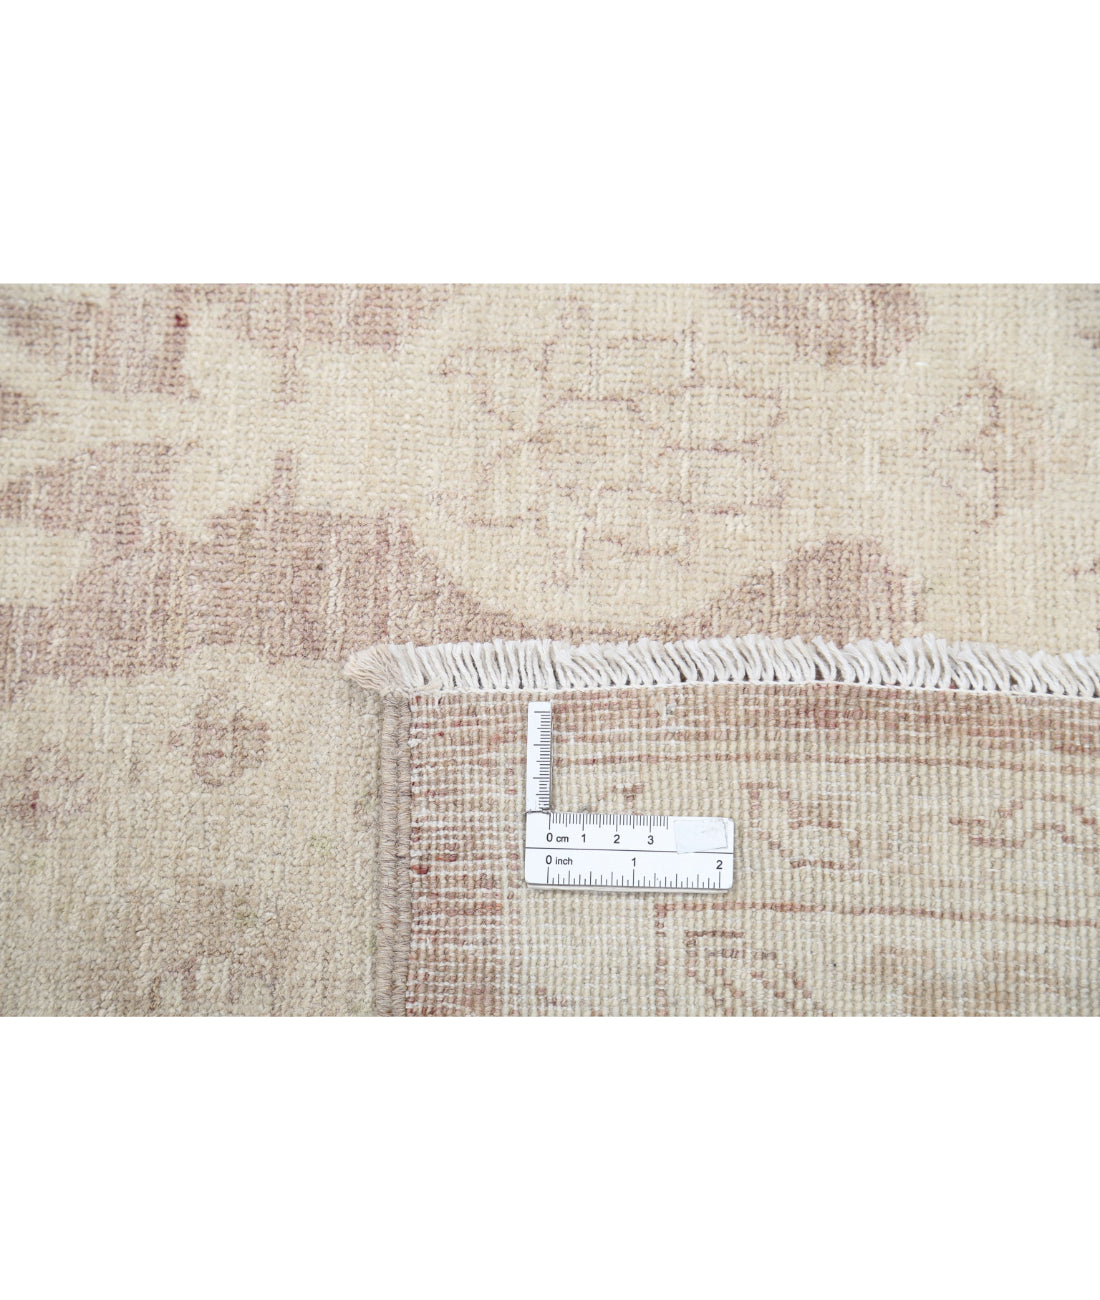 Hand Knotted Serenity Wool Rug - 11'6'' x 14'11'' 11'6'' x 14'11'' (345 X 448) / Taupe / Ivory